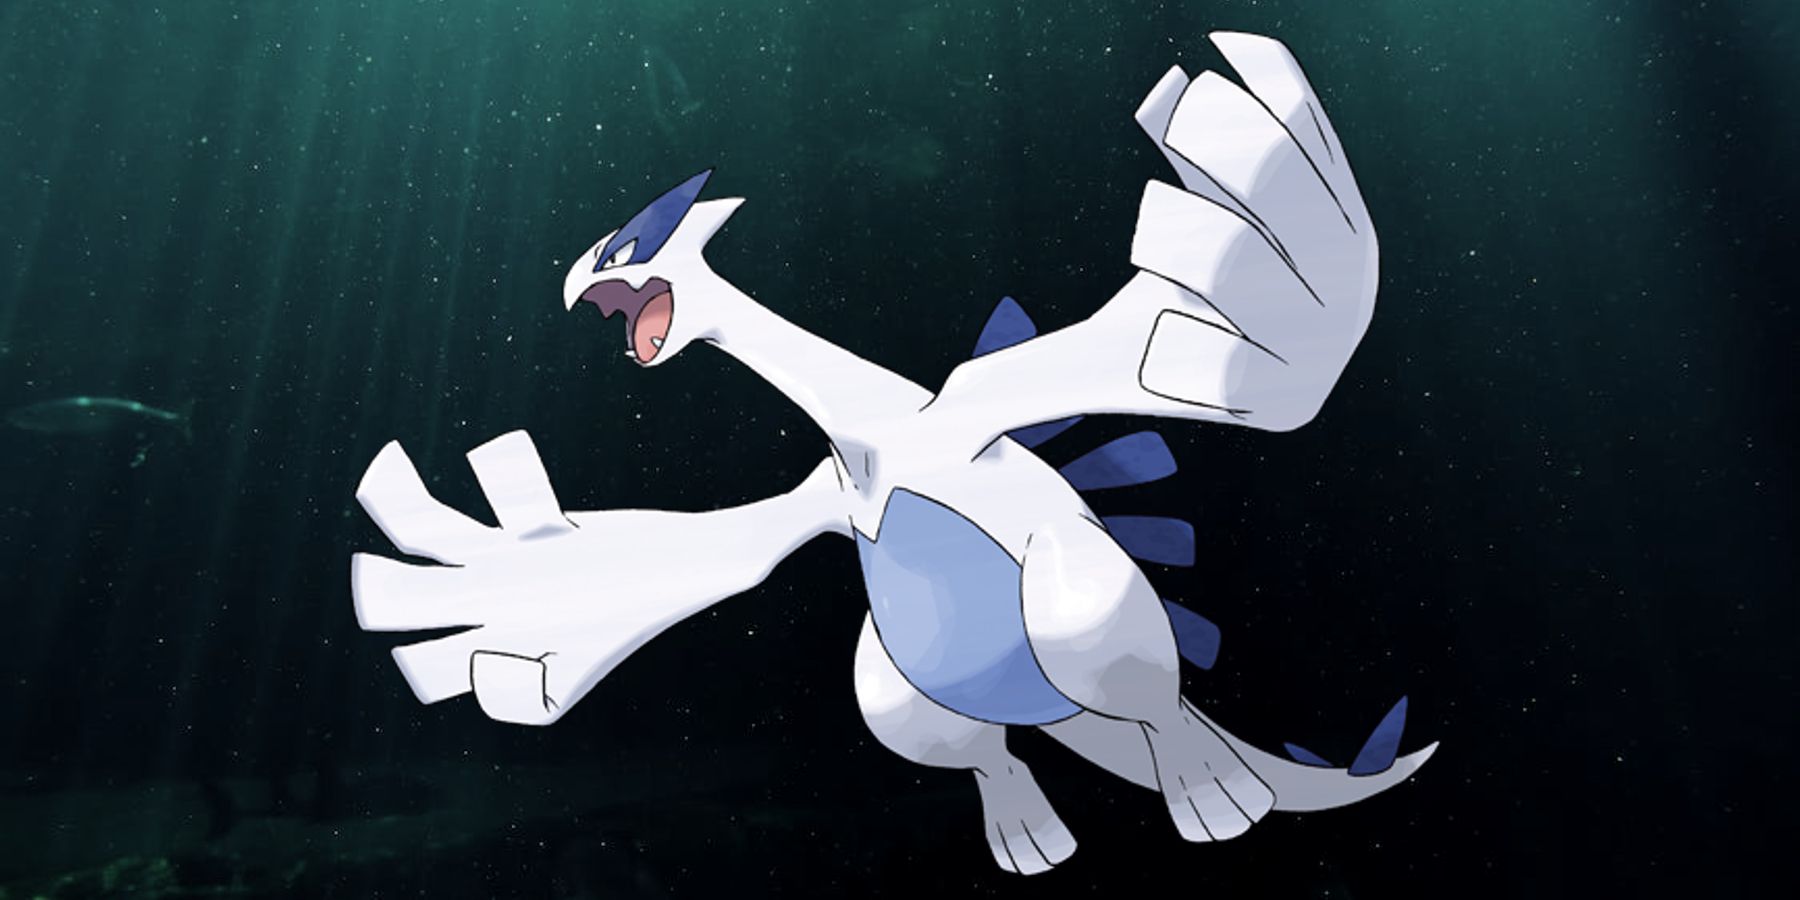 Lugia vocalizes a screech in the deep ocean in Pokemon